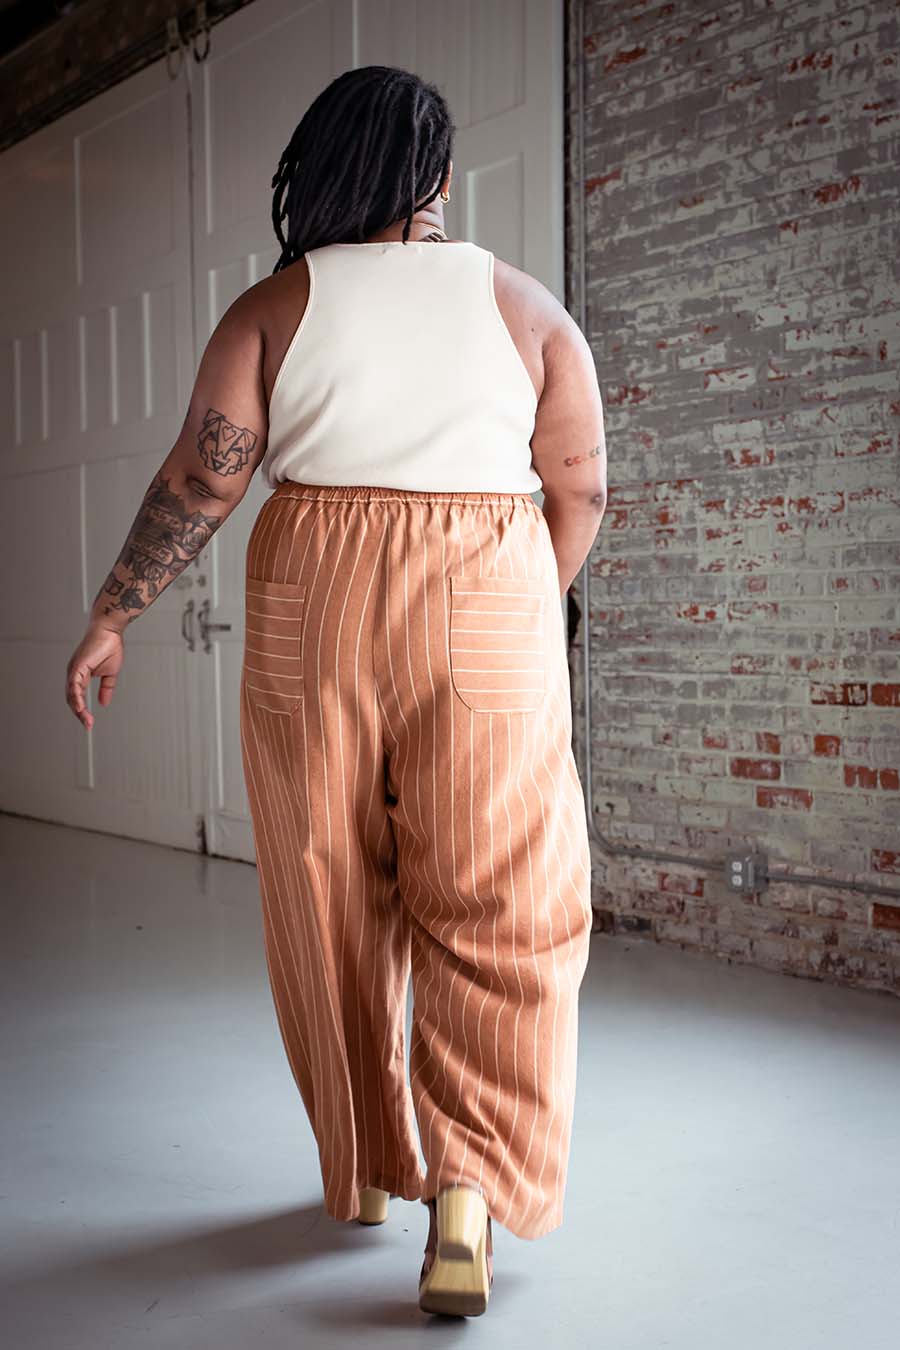 Ashley wearing striped view a chanterelle pants and a cream tank